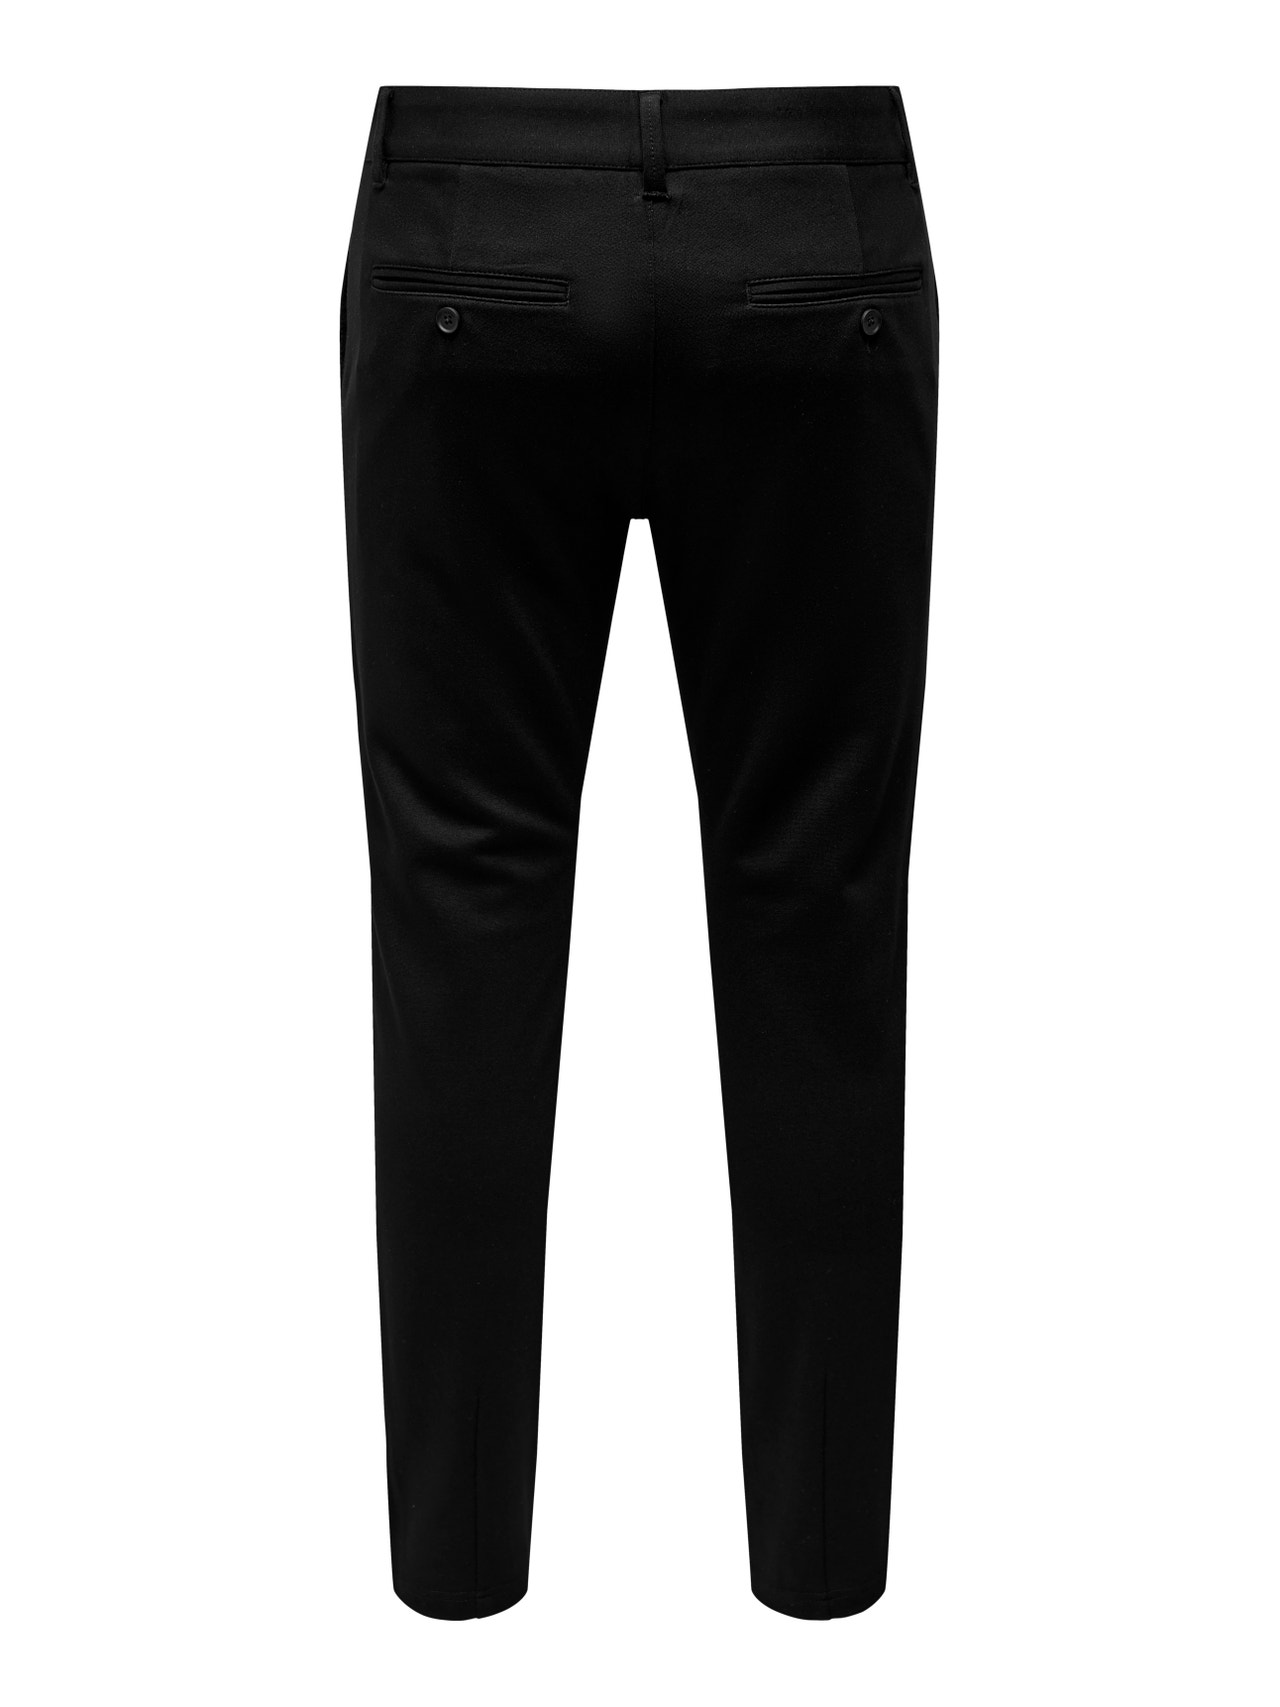 ONLY & SONS Tapered fit - Cropped Mid waist Trousers -Black - 22025747